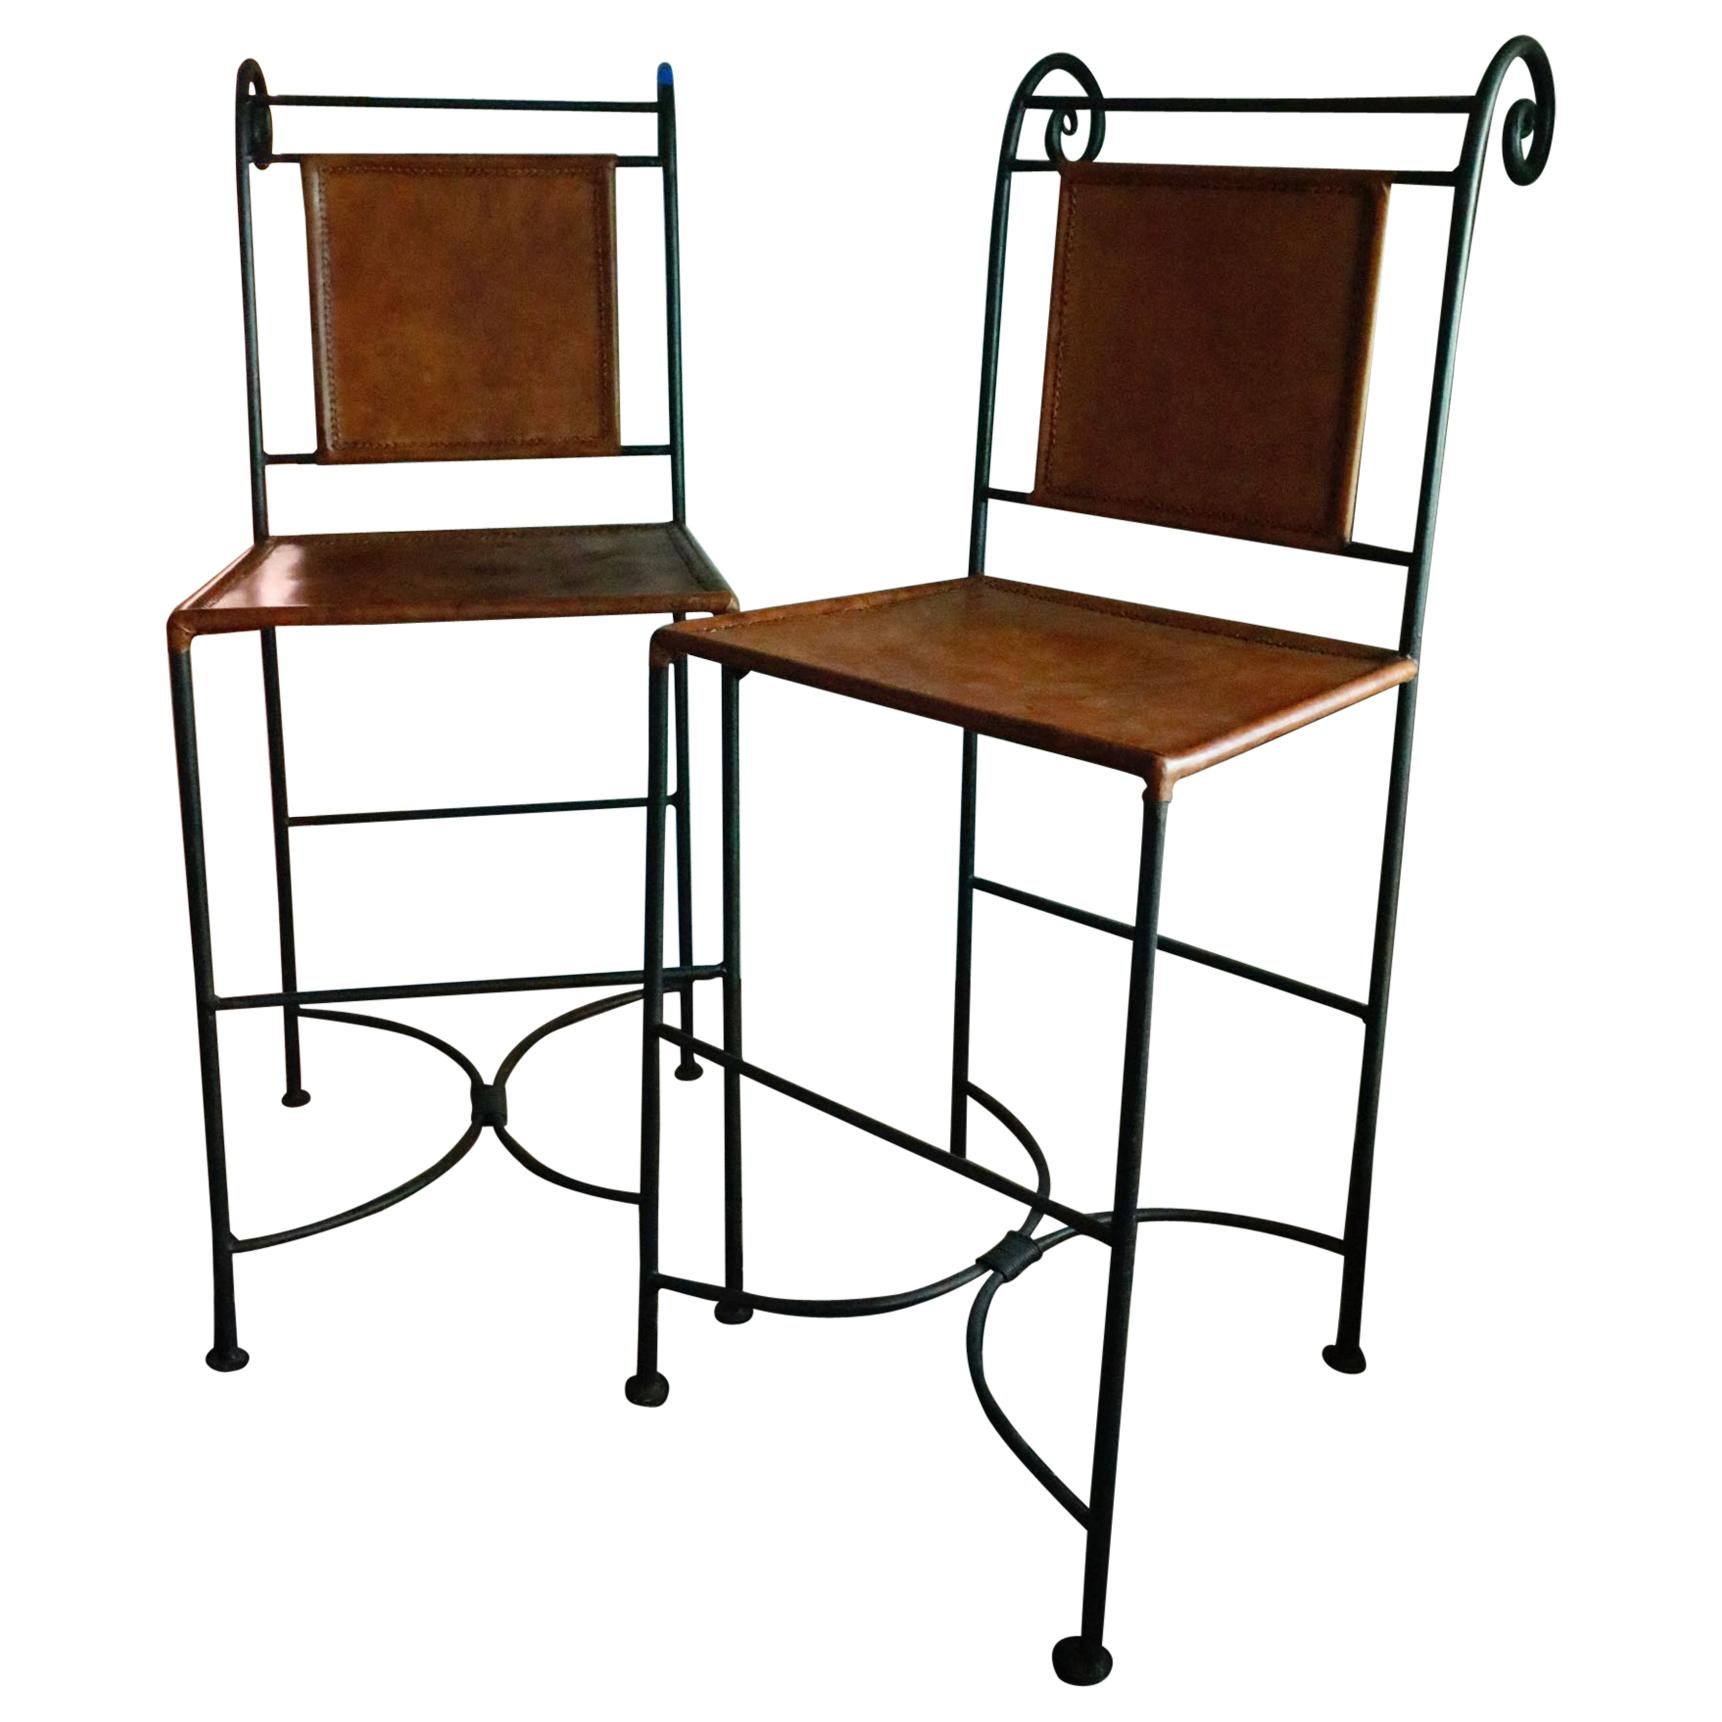 Ralph Lauren Bar Stools Leather and Wrought Iron, Classic and Sleek All in One